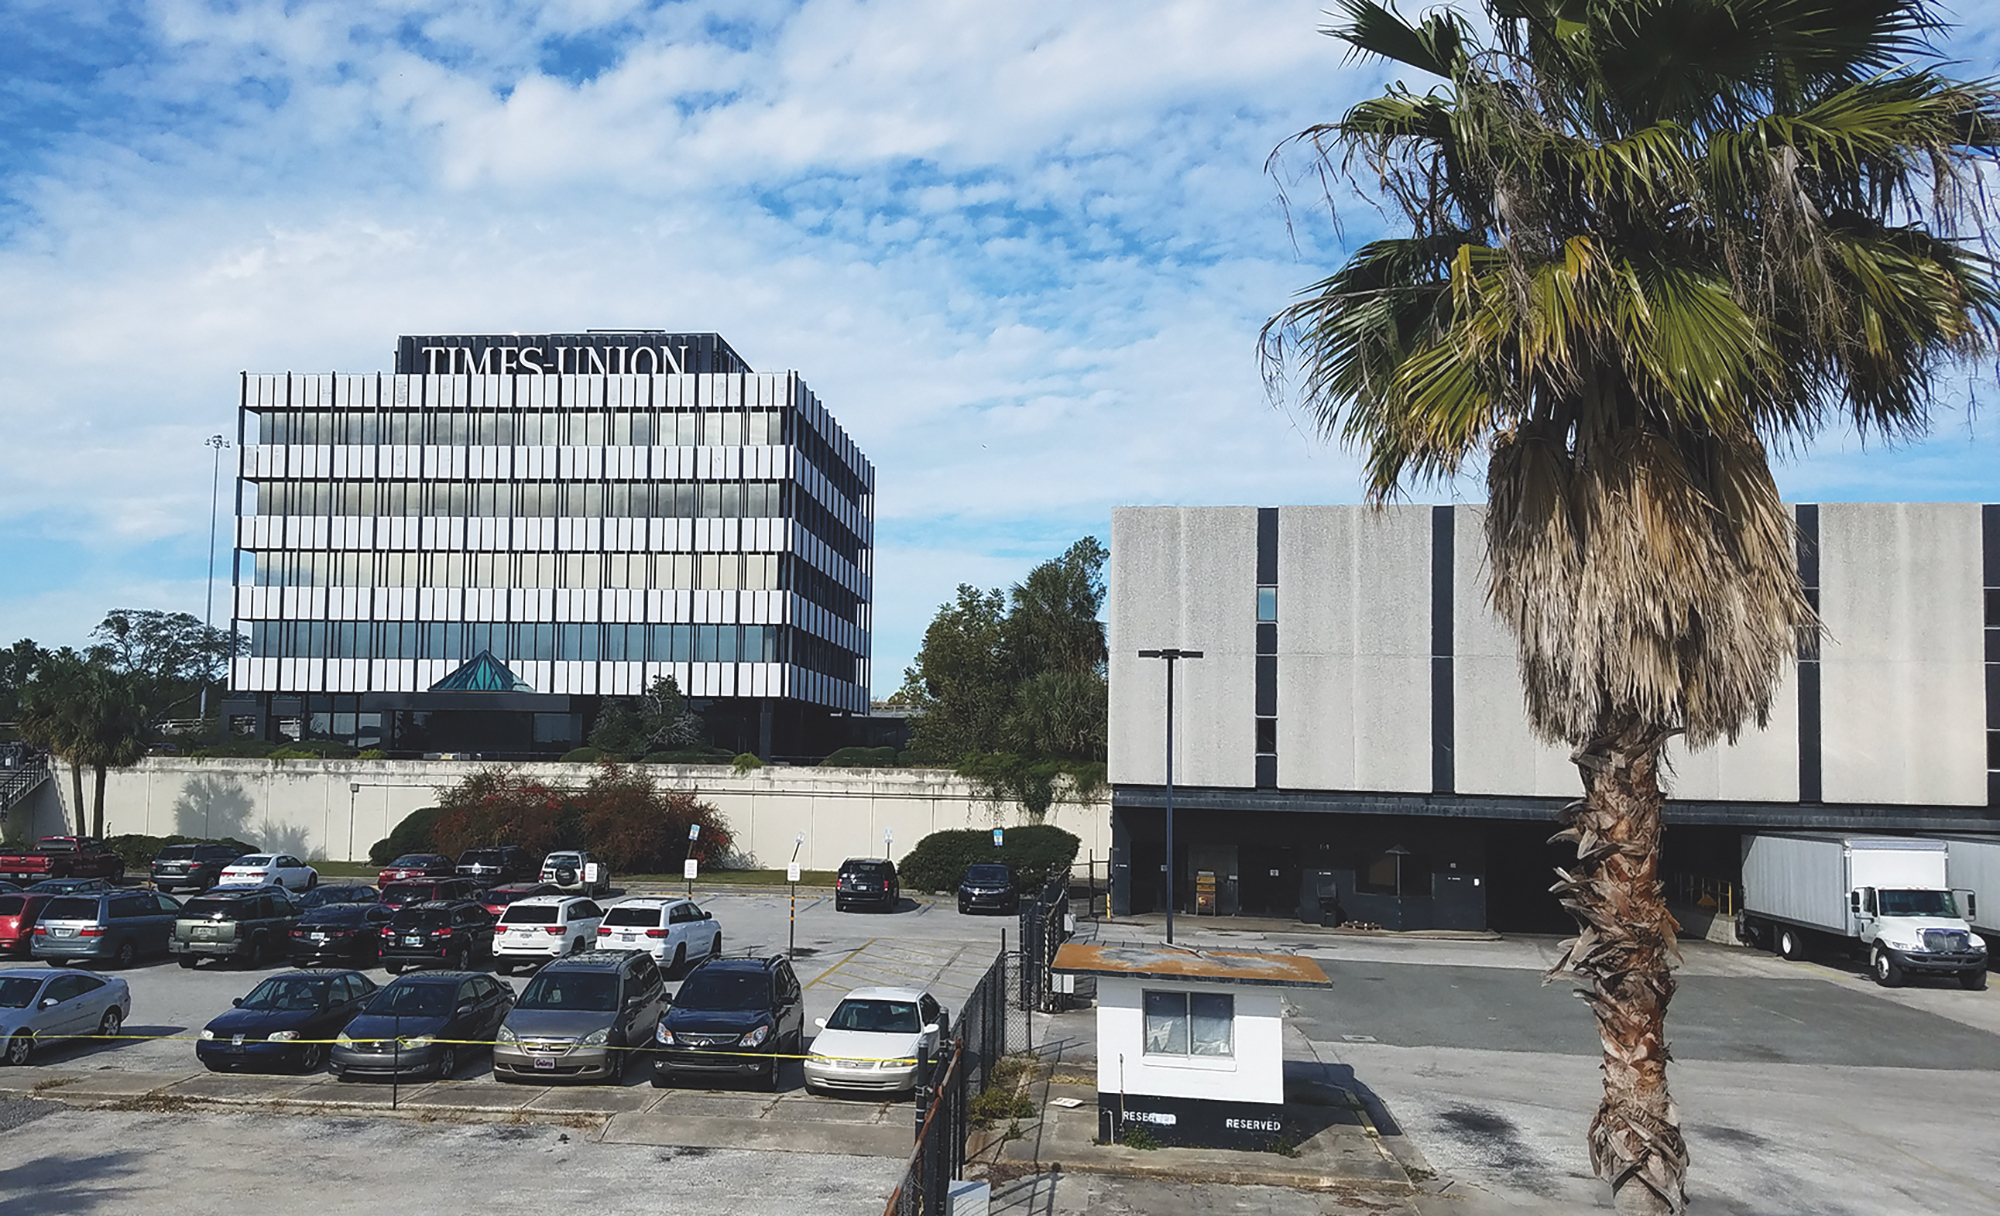 With the staff of The Florida Times-Union moved to the Wells Fargo Center, demolition could be next for the newspaper’s former home on Riverside Avenue.